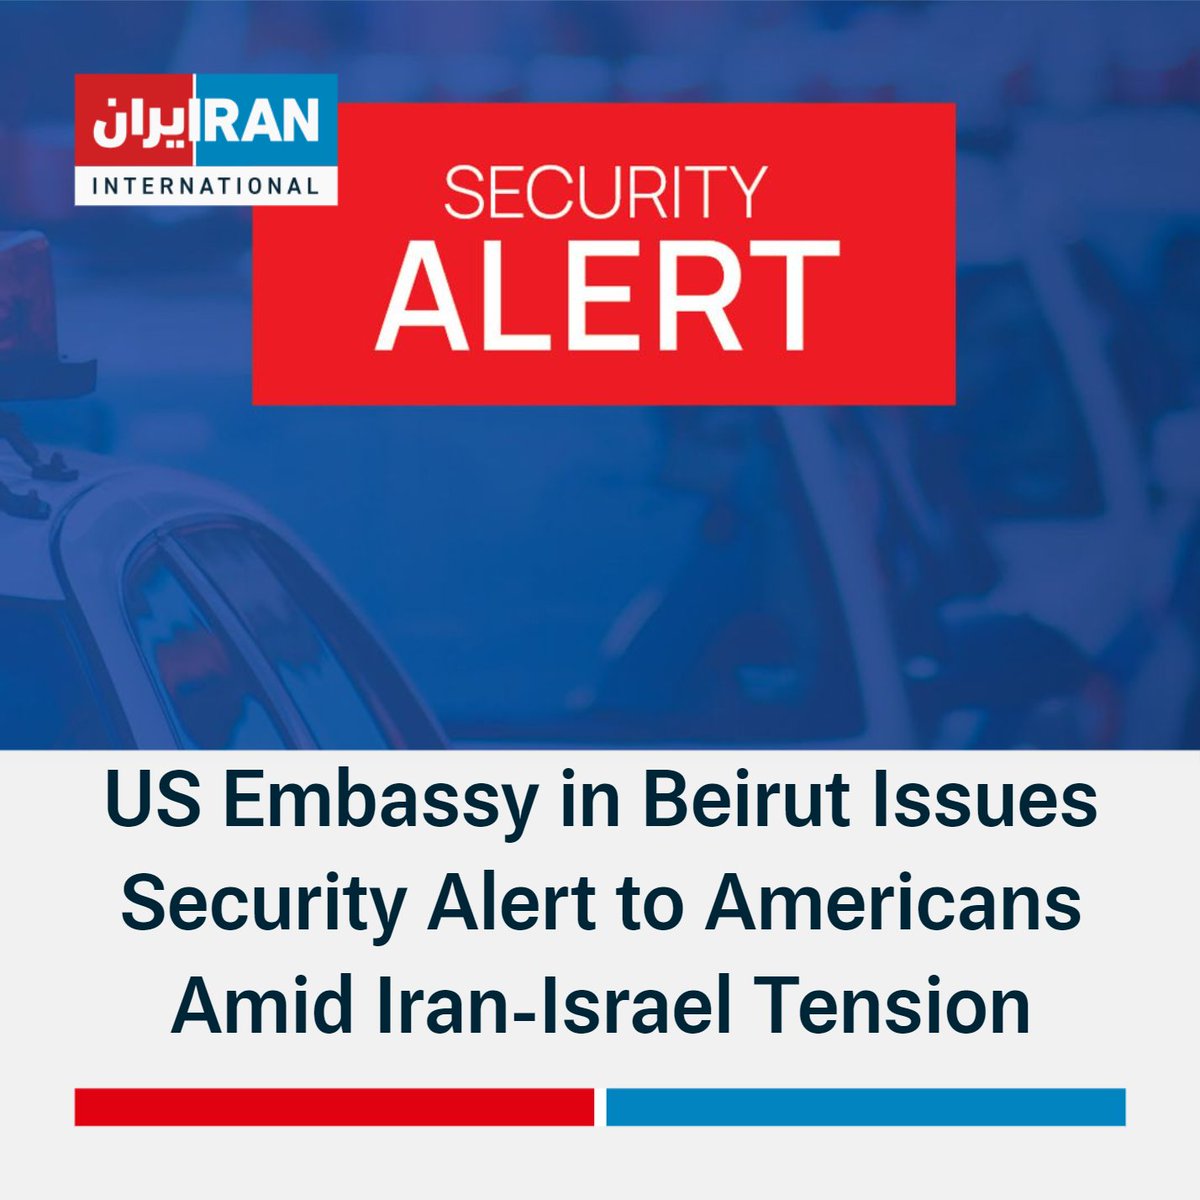 The US Embassy in Beirut has released a security alert which says due to high tensions in the region, the security environment remains complex and can change quicky.  We remind US citizens of the continued need for caution and encourage them to monitor the news for breaking developments.